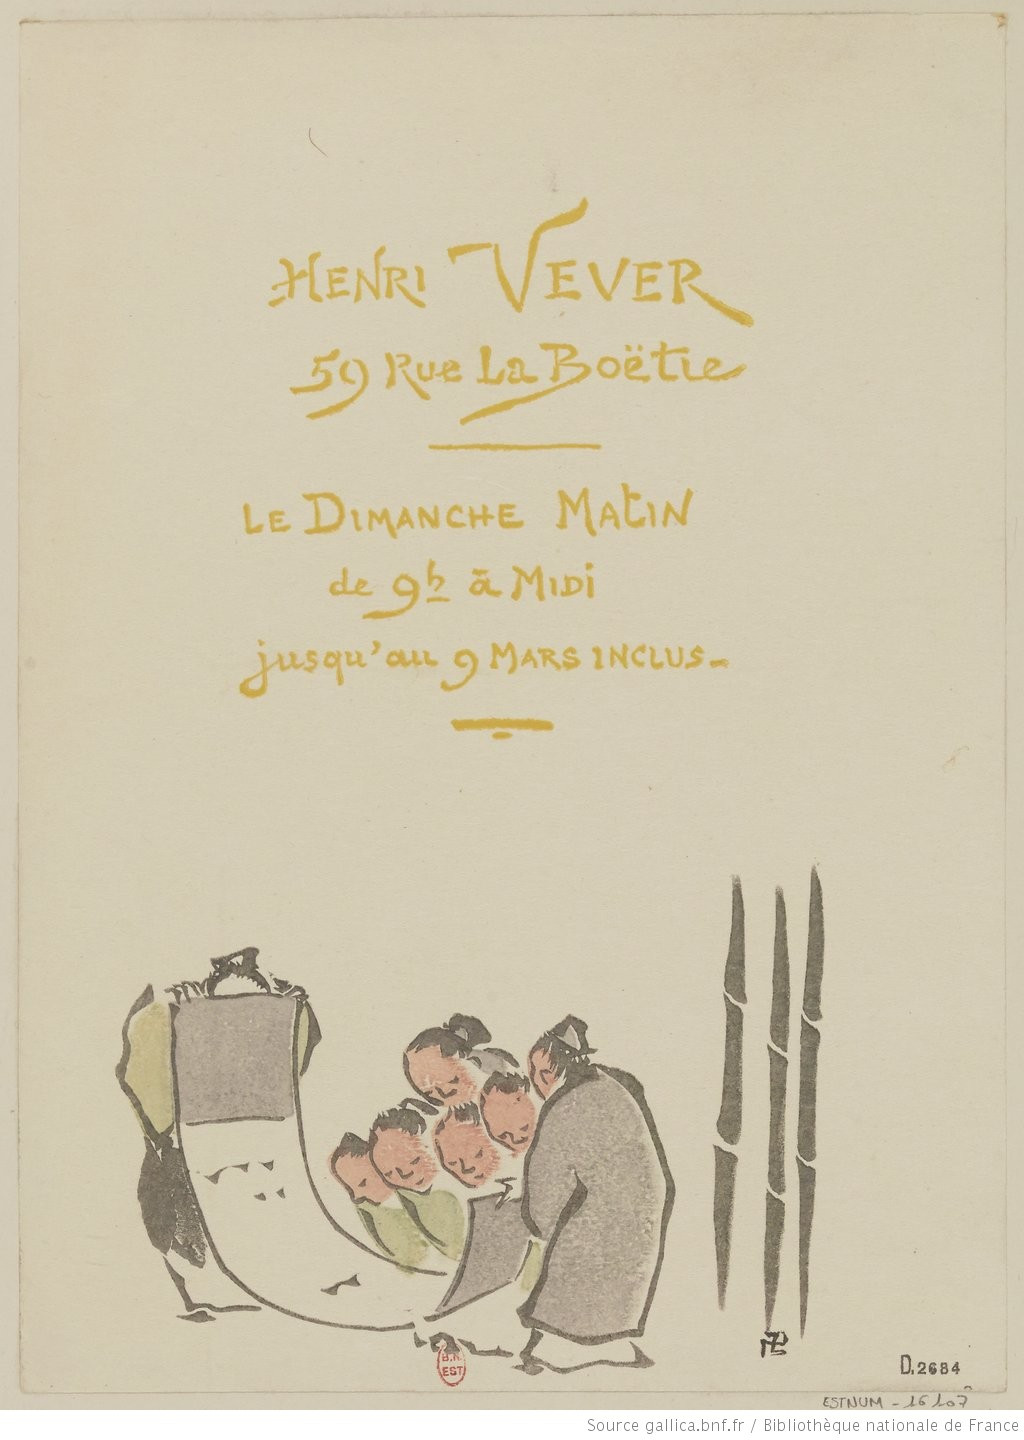 Vever's card with his name and a drawing of seven characters in Japanese clothes